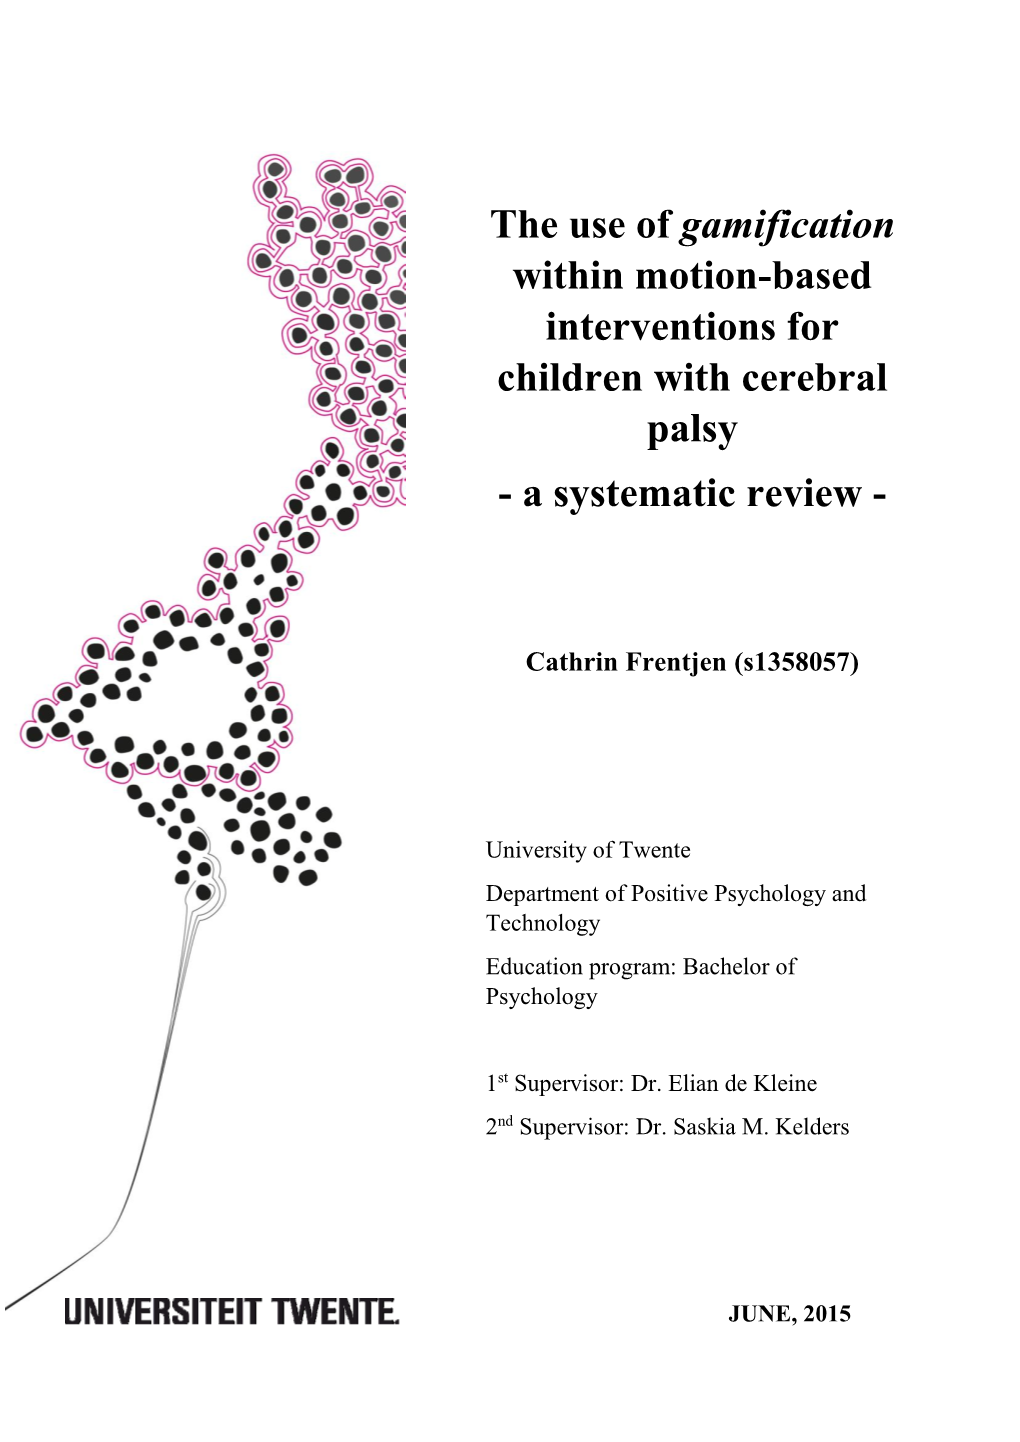 The Use of Gamification Within Motion-Based Interventions for Children with Cerebral